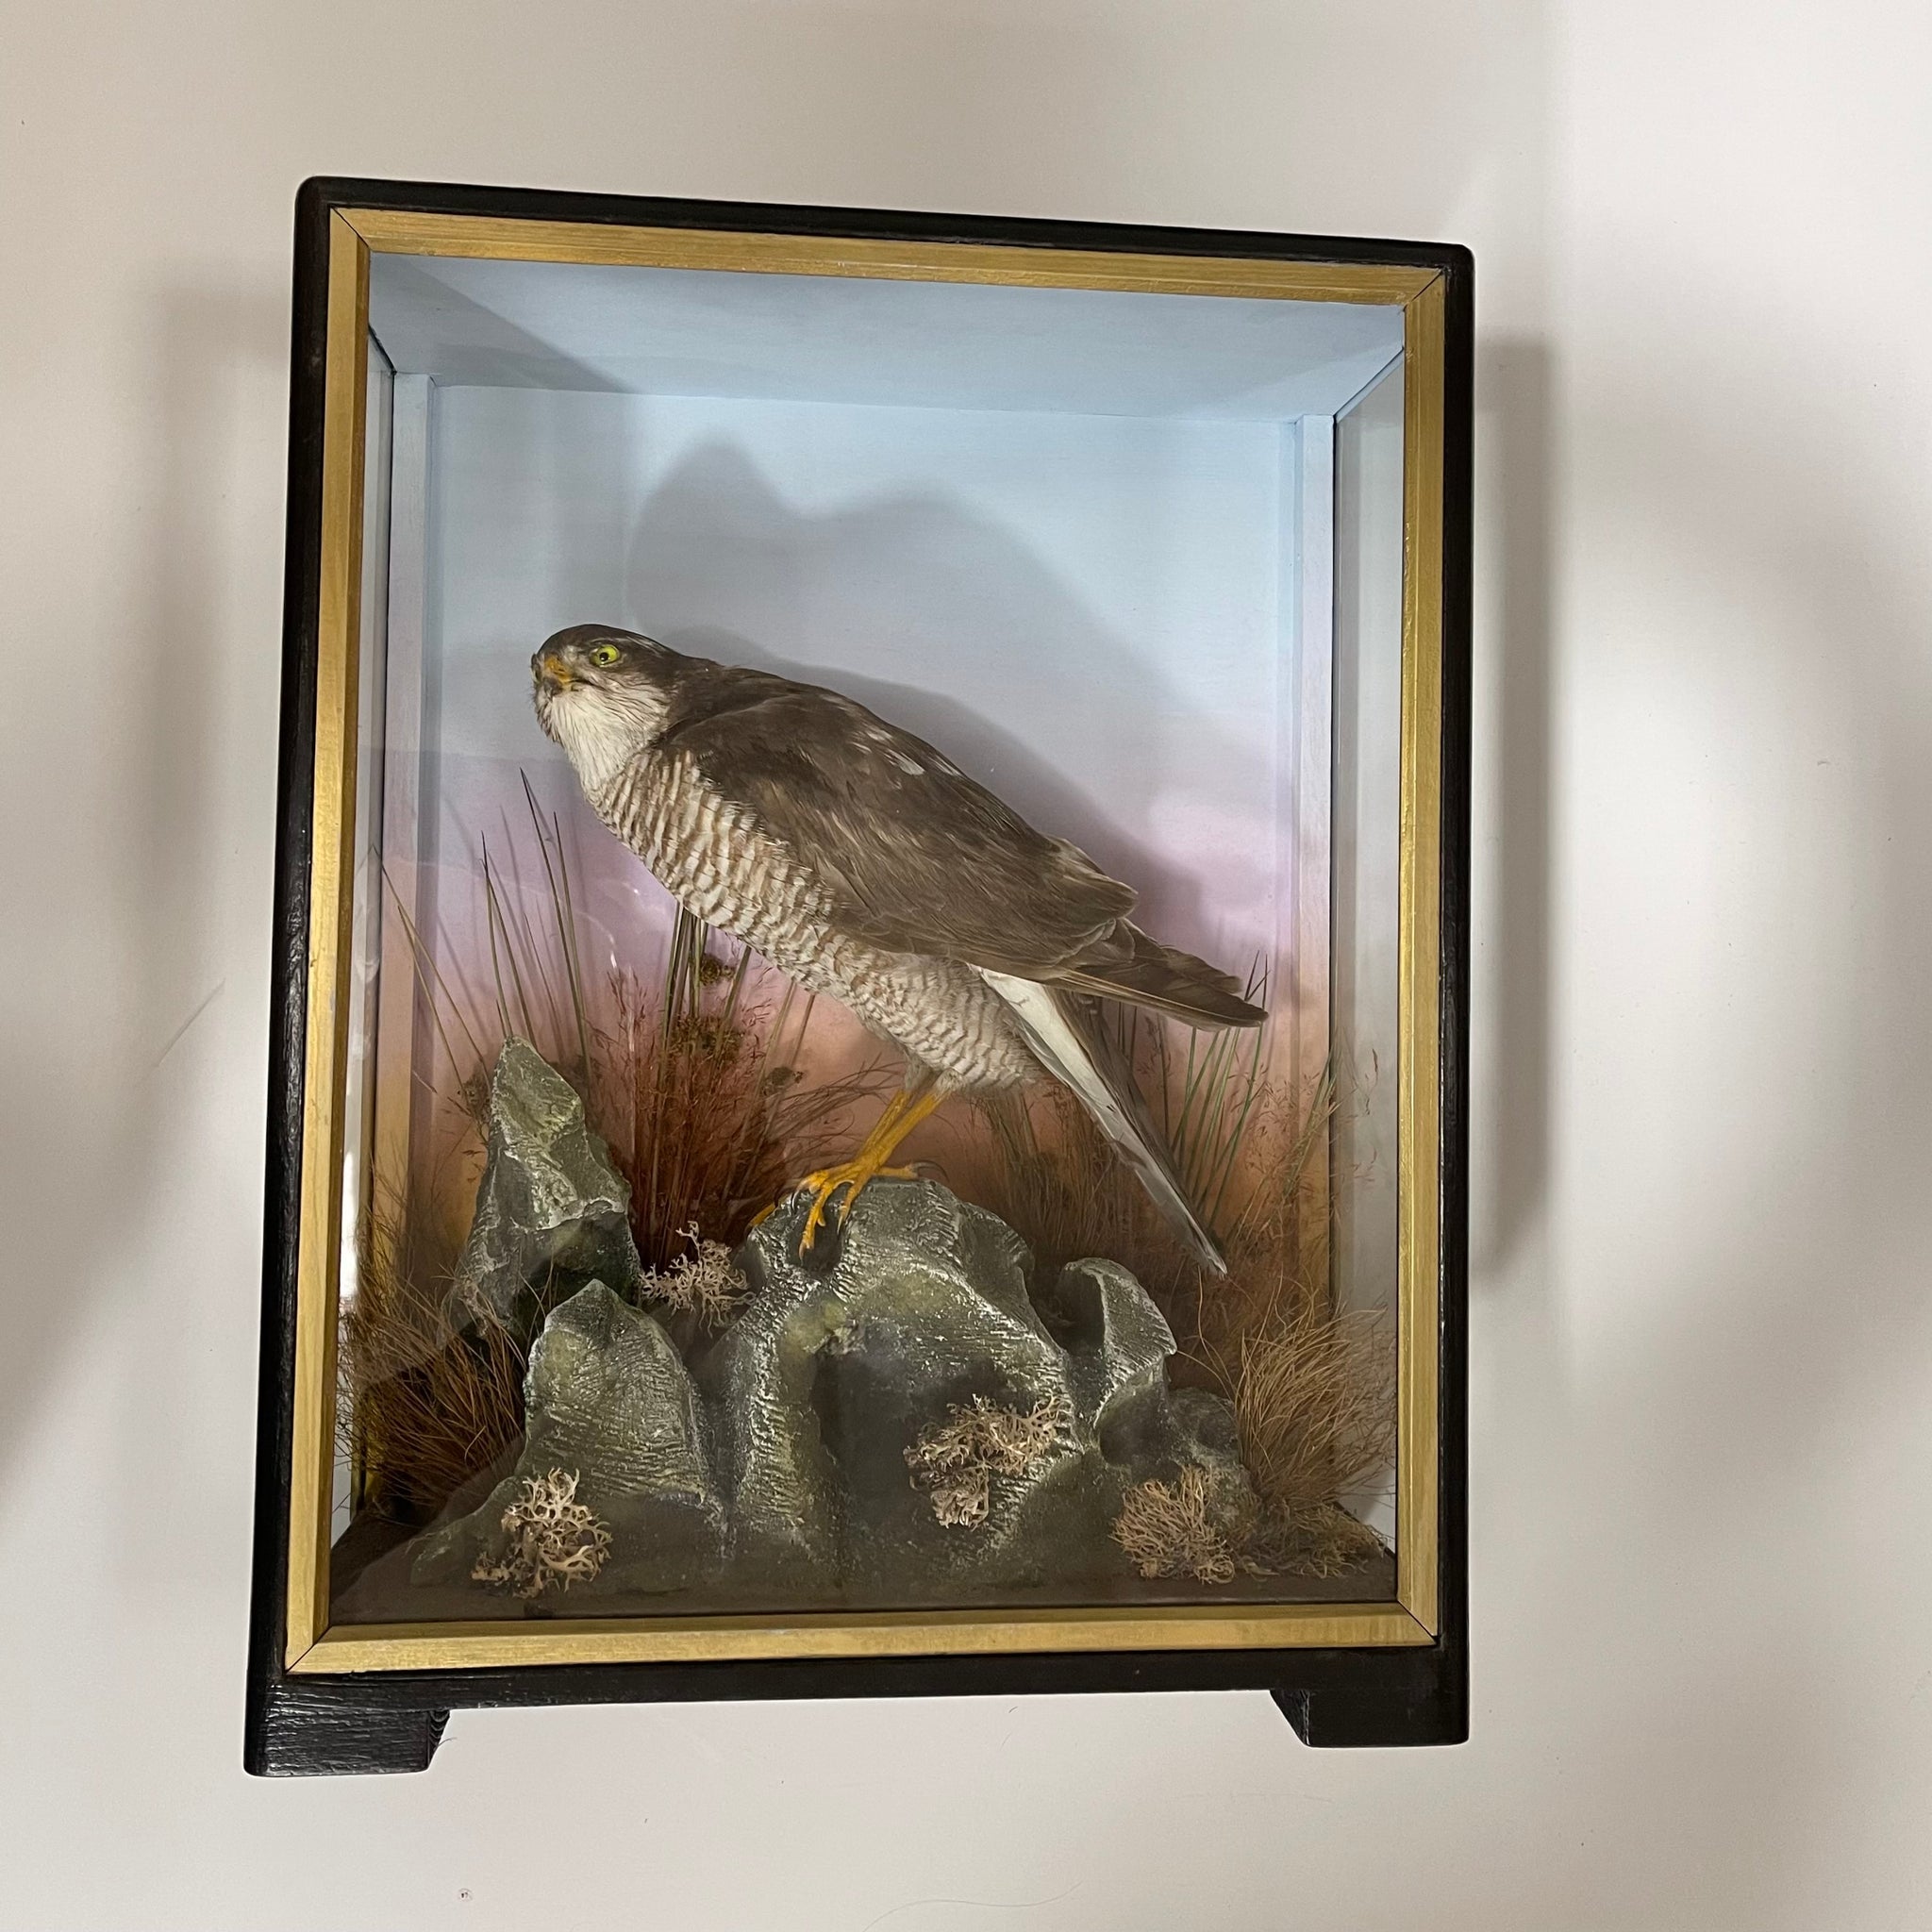 Taxidermy Hutchings Antique Specimen Of A Sparrowhawk